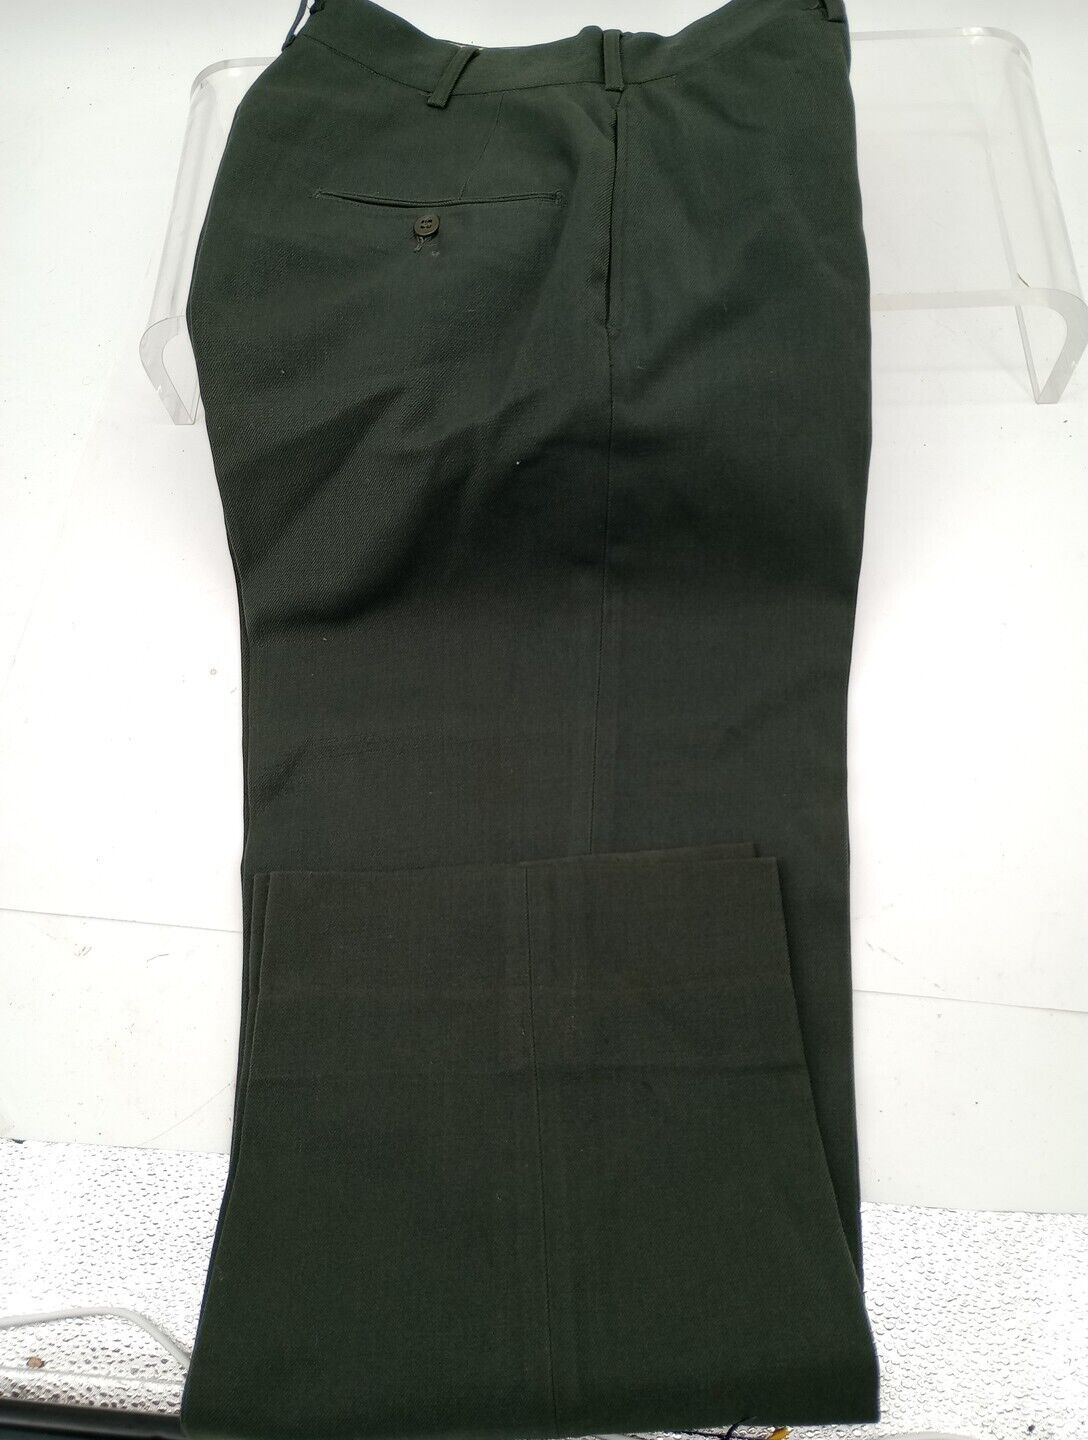 VINTAGE Military Wool Trousers Size 28x32 ARMY Dress Slacks Excellent Condition 